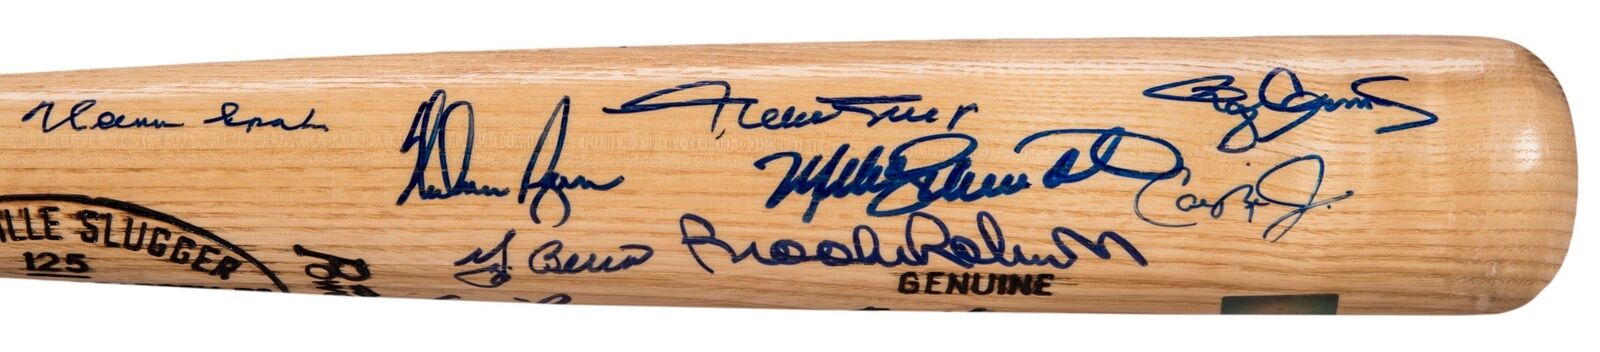 Extraordinary All Century Team Signed Bat 17 Sigs With Ted Williams JSA COA